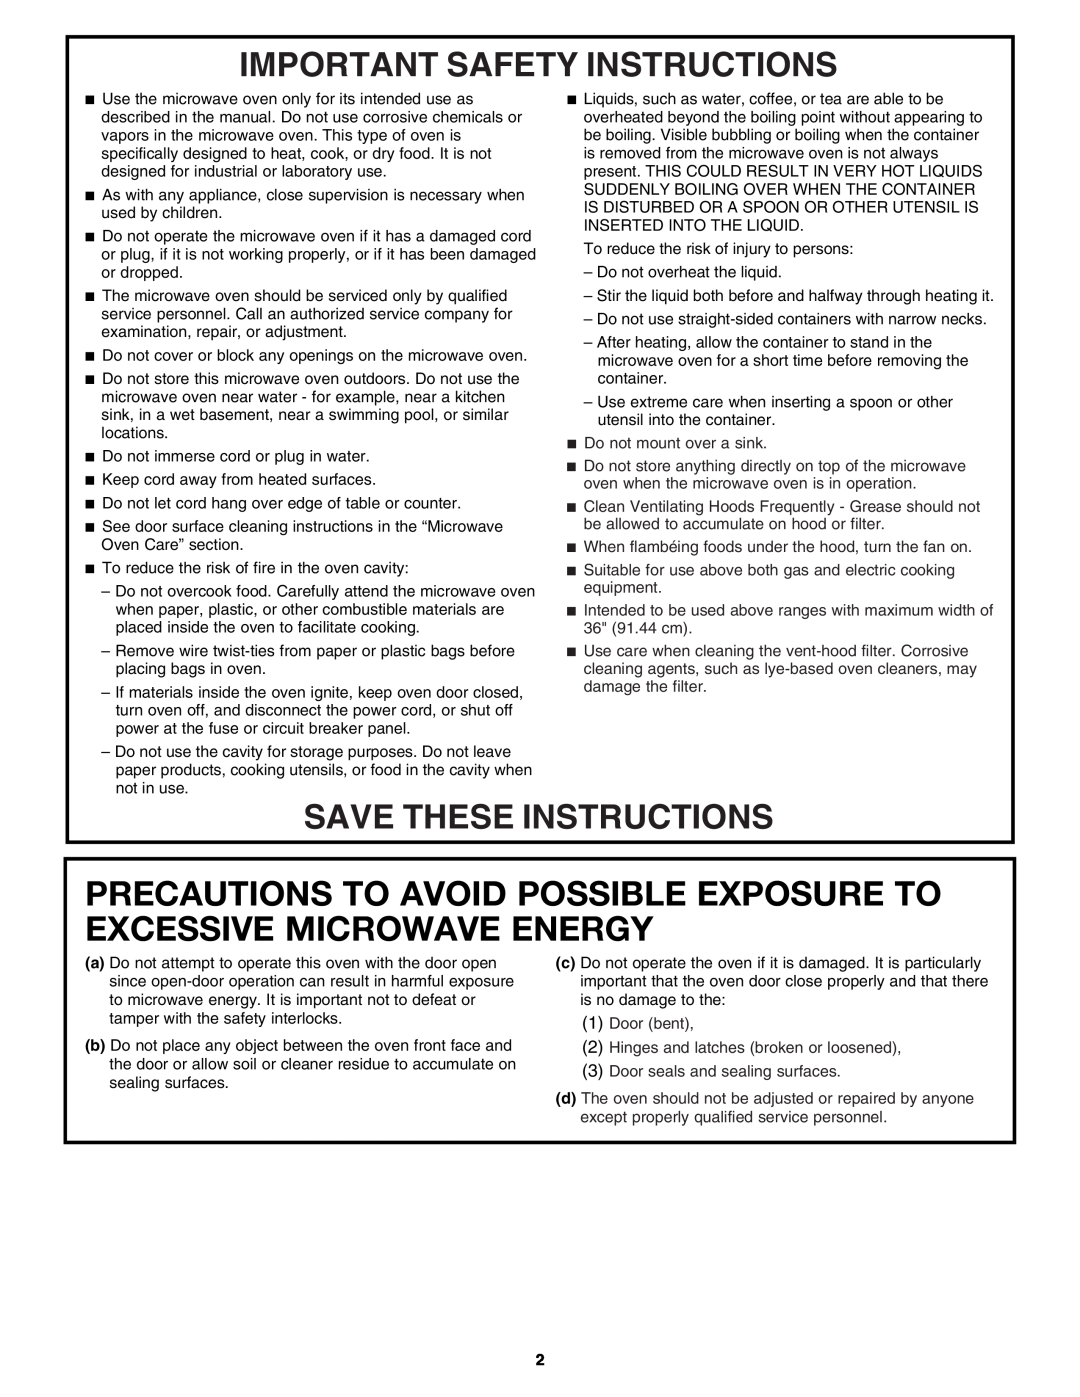 Whirlpool W10545084A Precautions To Avoid Possible Exposure To Excessive Microwave Energy, Important Safety Instructions 